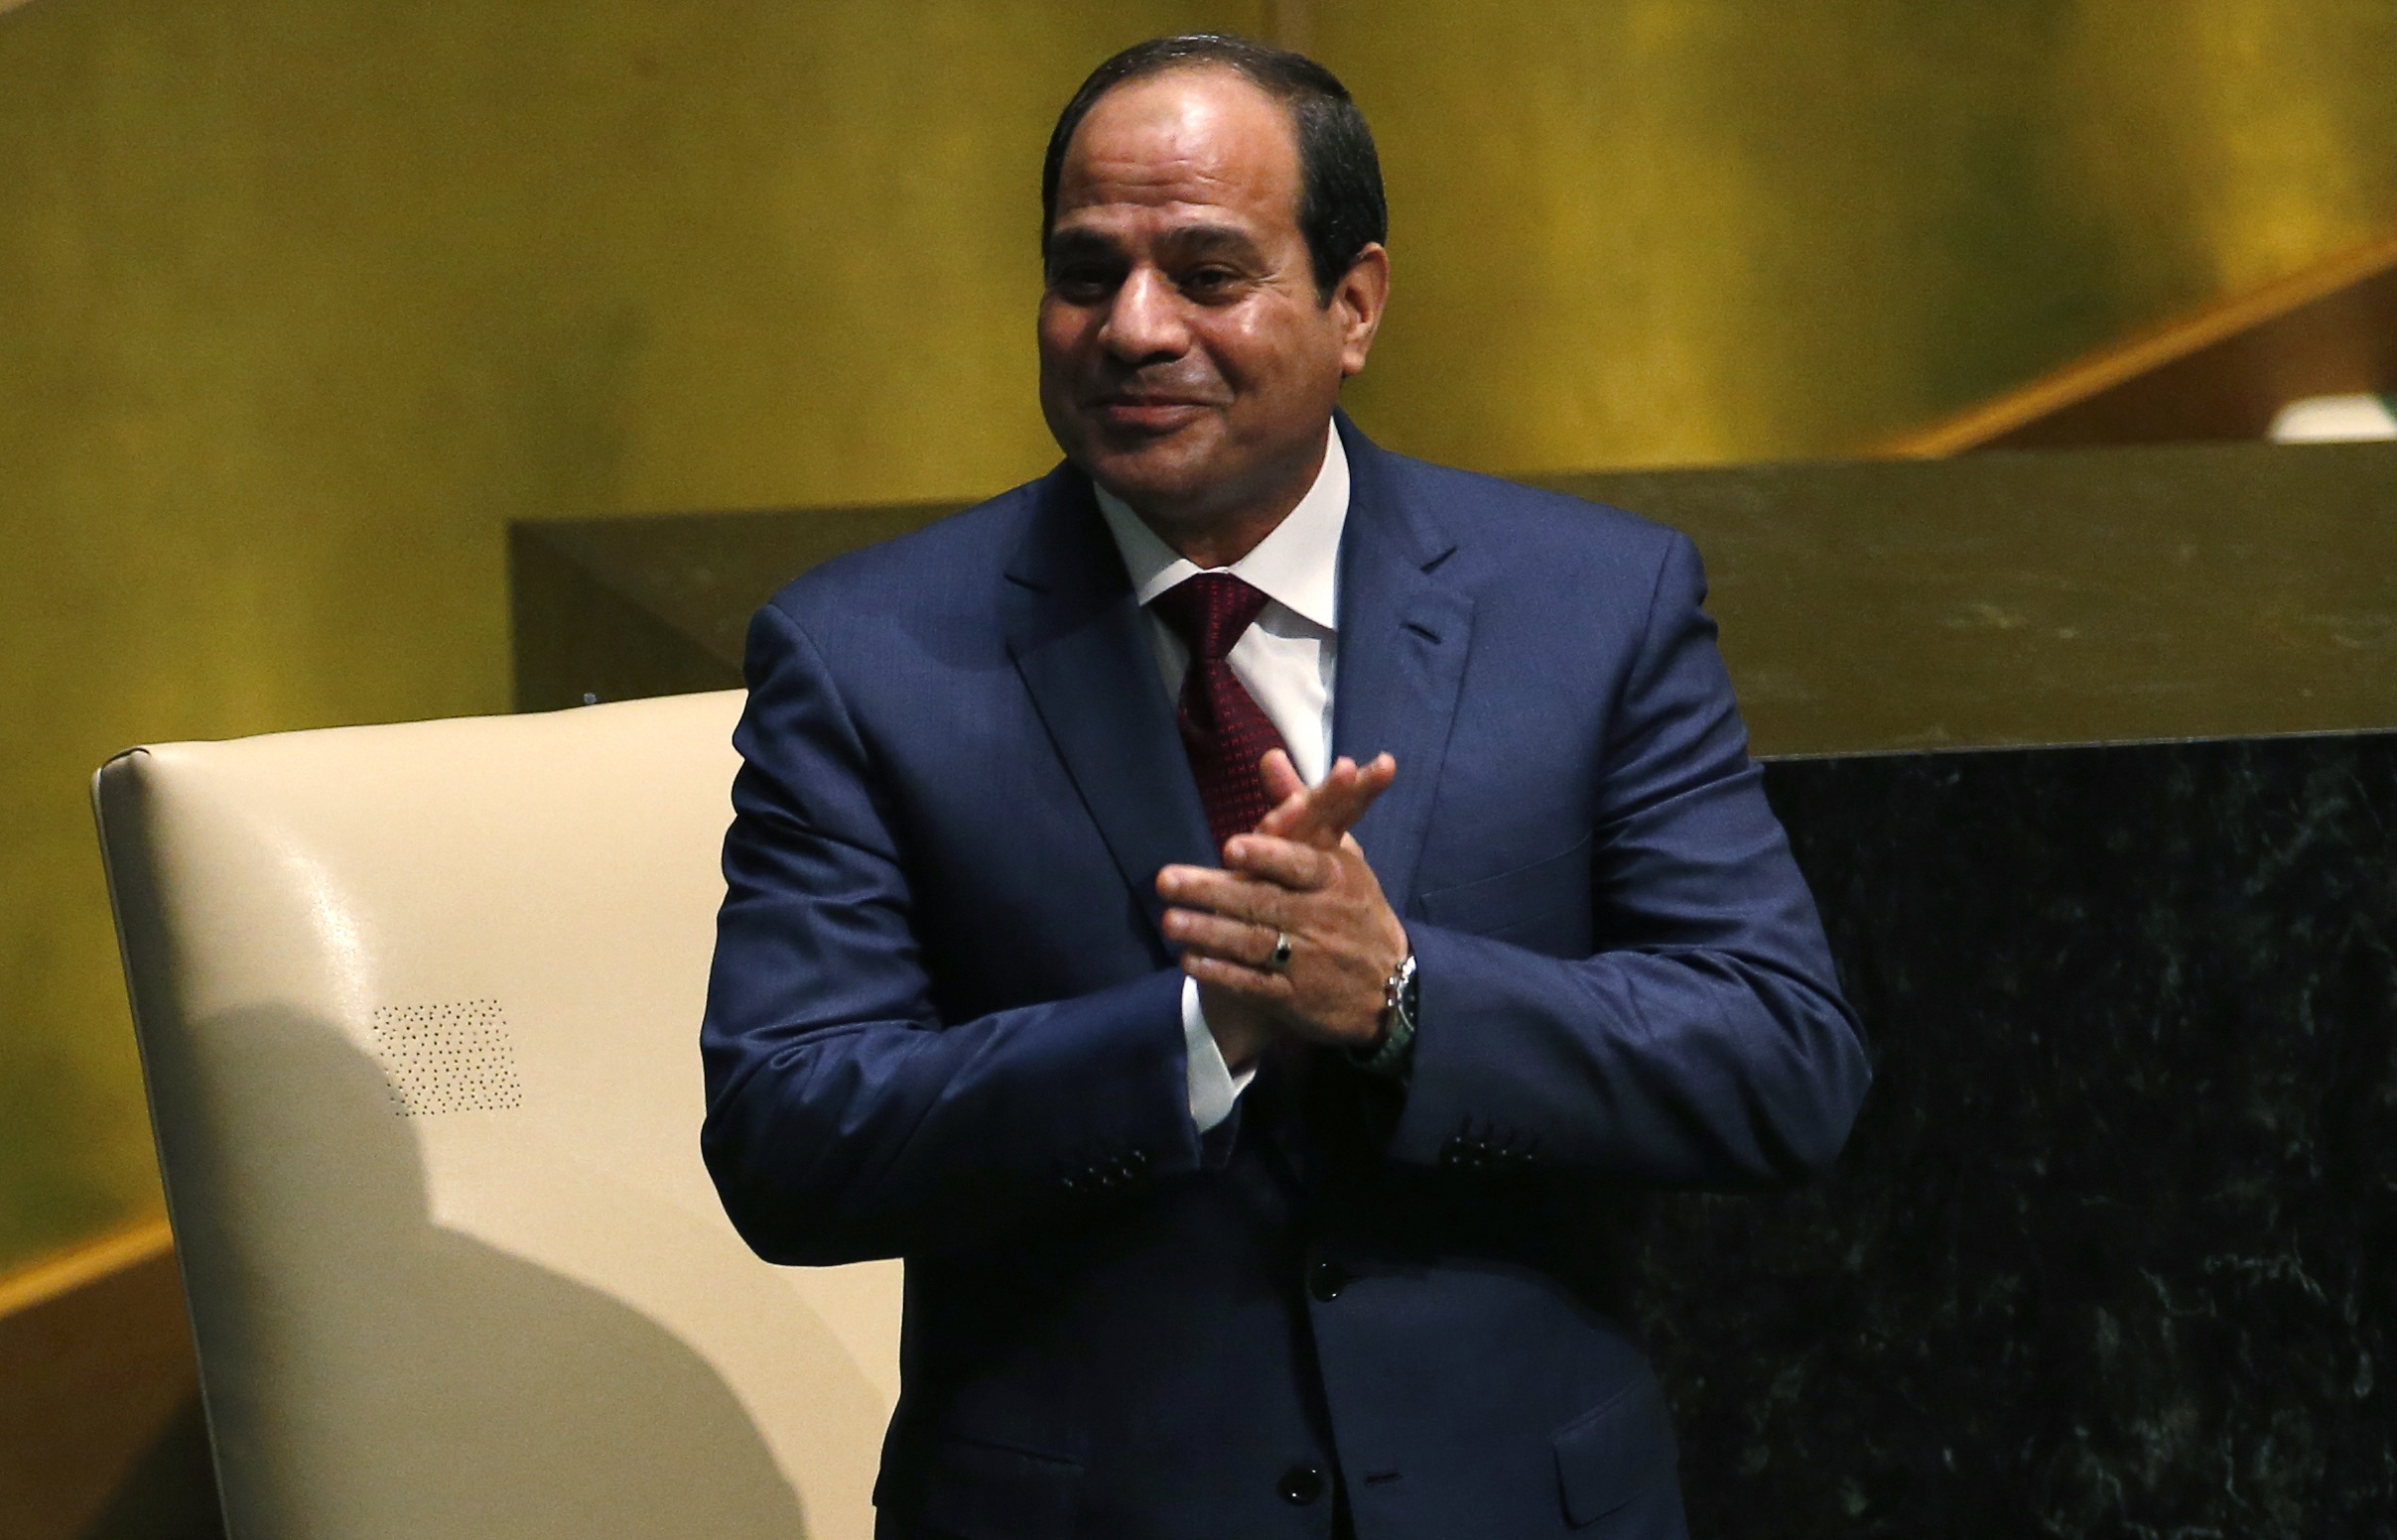 Egypt's President Abdel Fattah al-Sisi acknowledges applause as he takes the stage before his address to the 69th United Nations General Assembly at U.N. headquarters in New York, September 24, 2014. (Photo: Reuters)